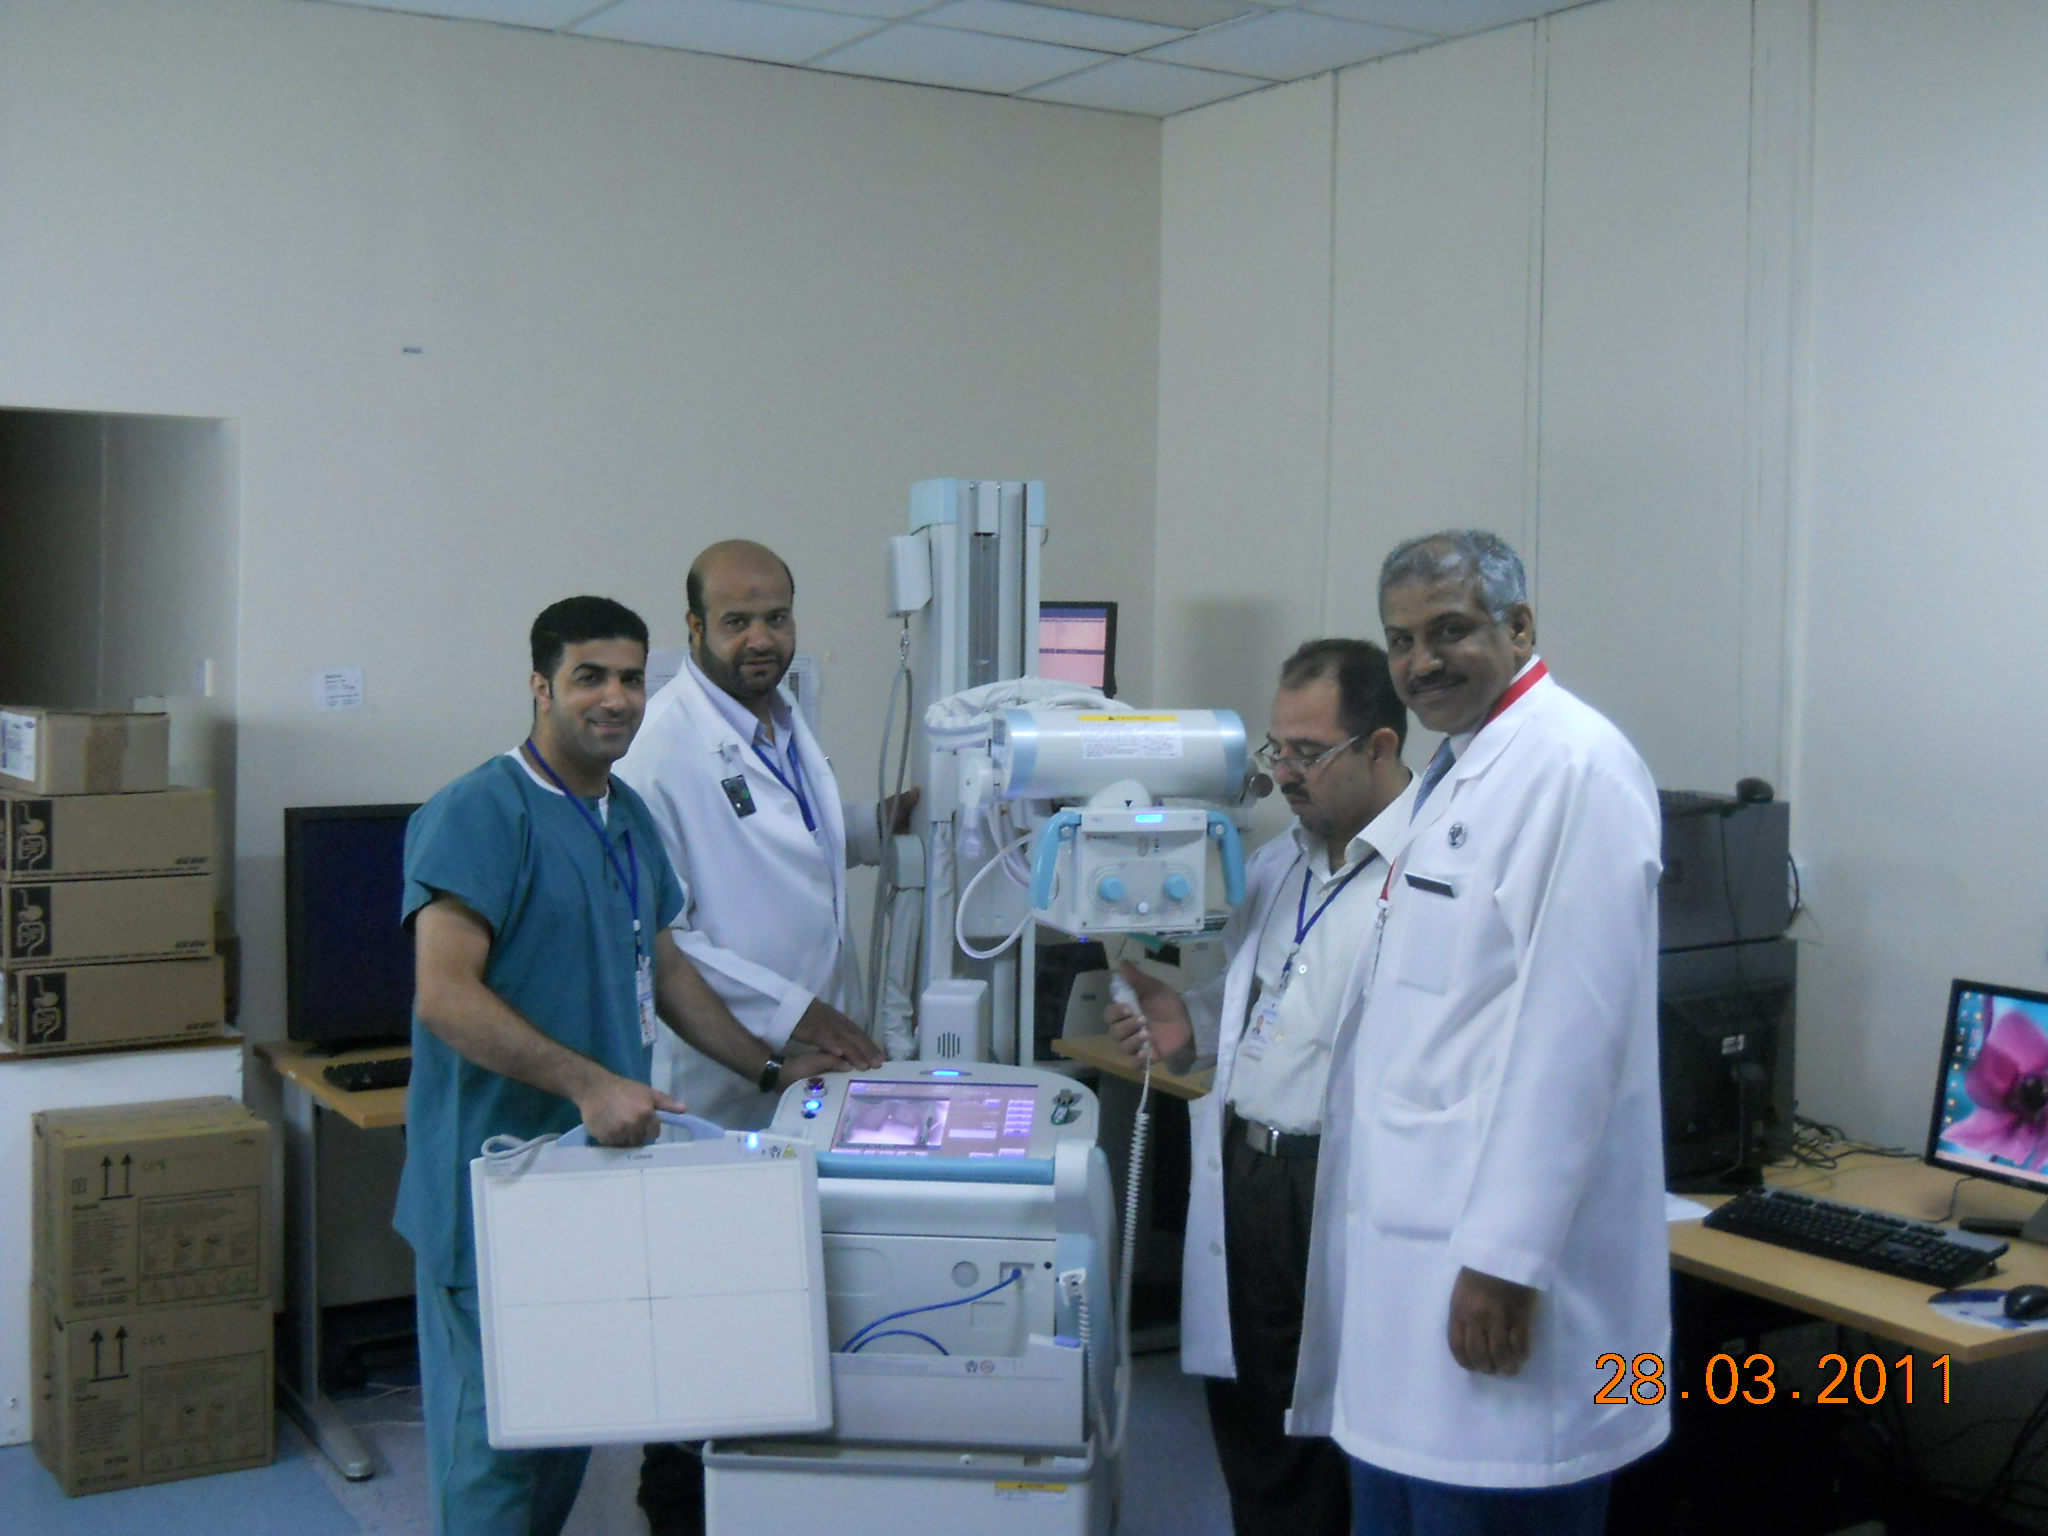 SMC has received one digital mobile X-ray unit